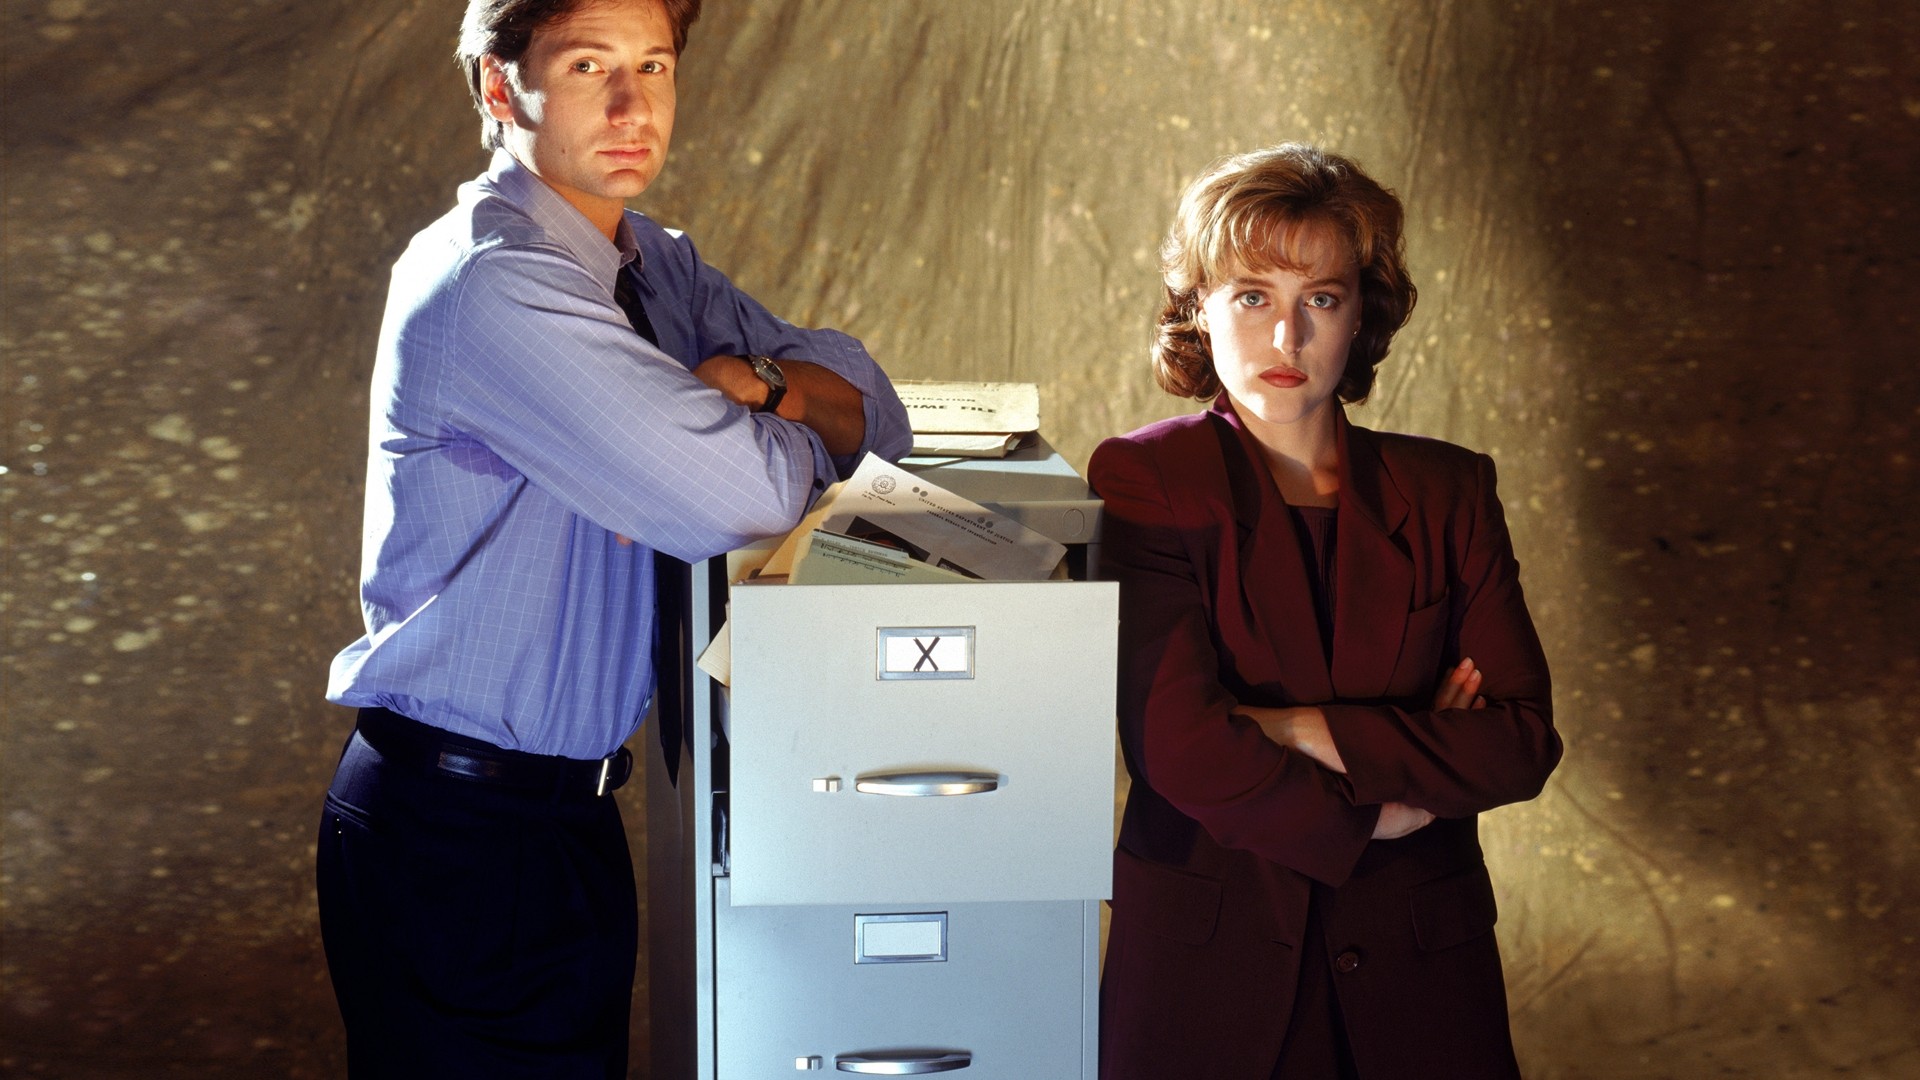 android tv show, the x files, dana scully, david duchovny, fox mulder, gillian anderson